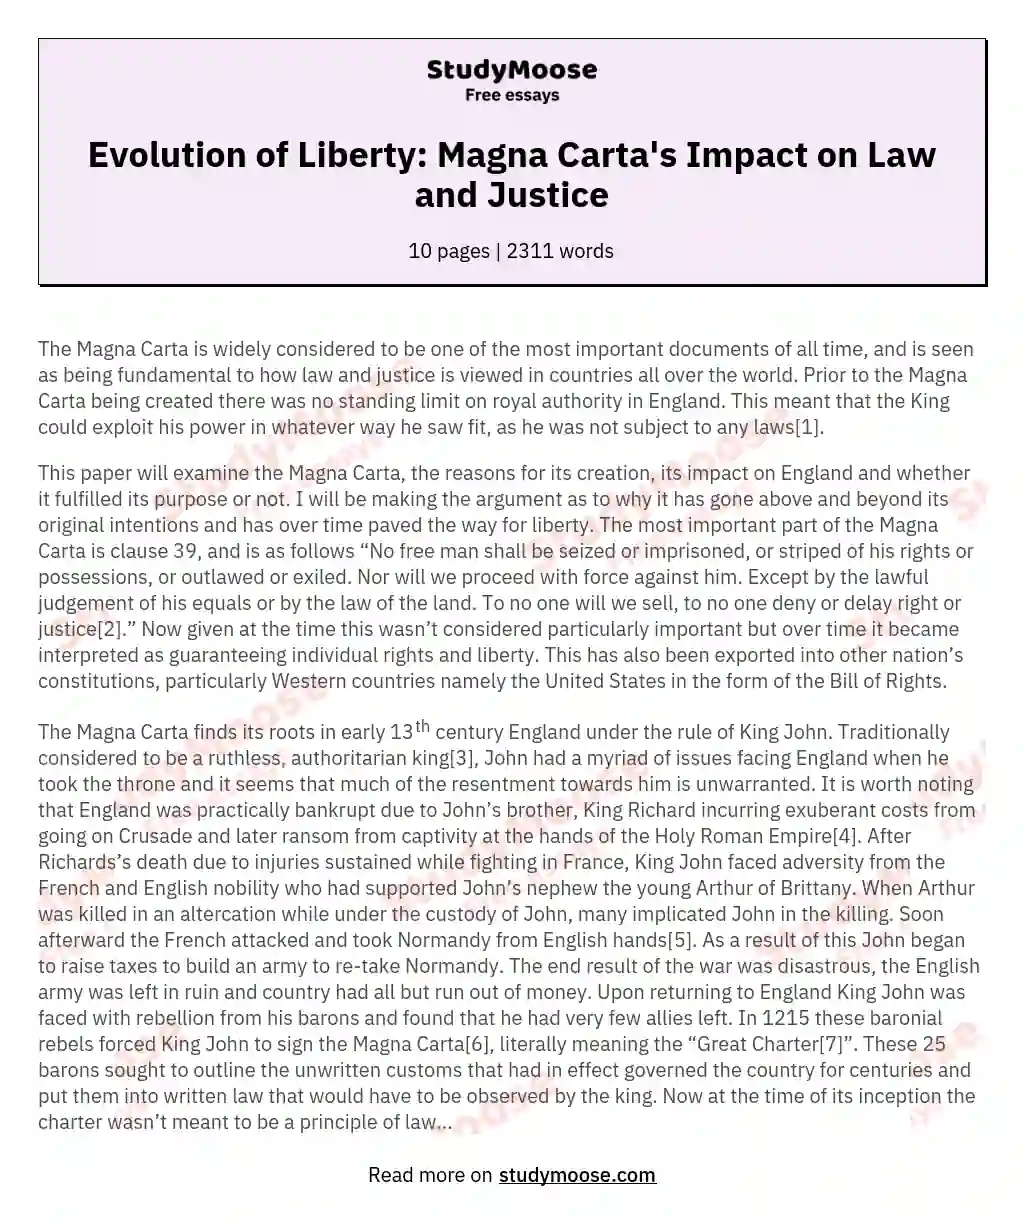 Evolution of Liberty: Magna Carta's Impact on Law and Justice essay